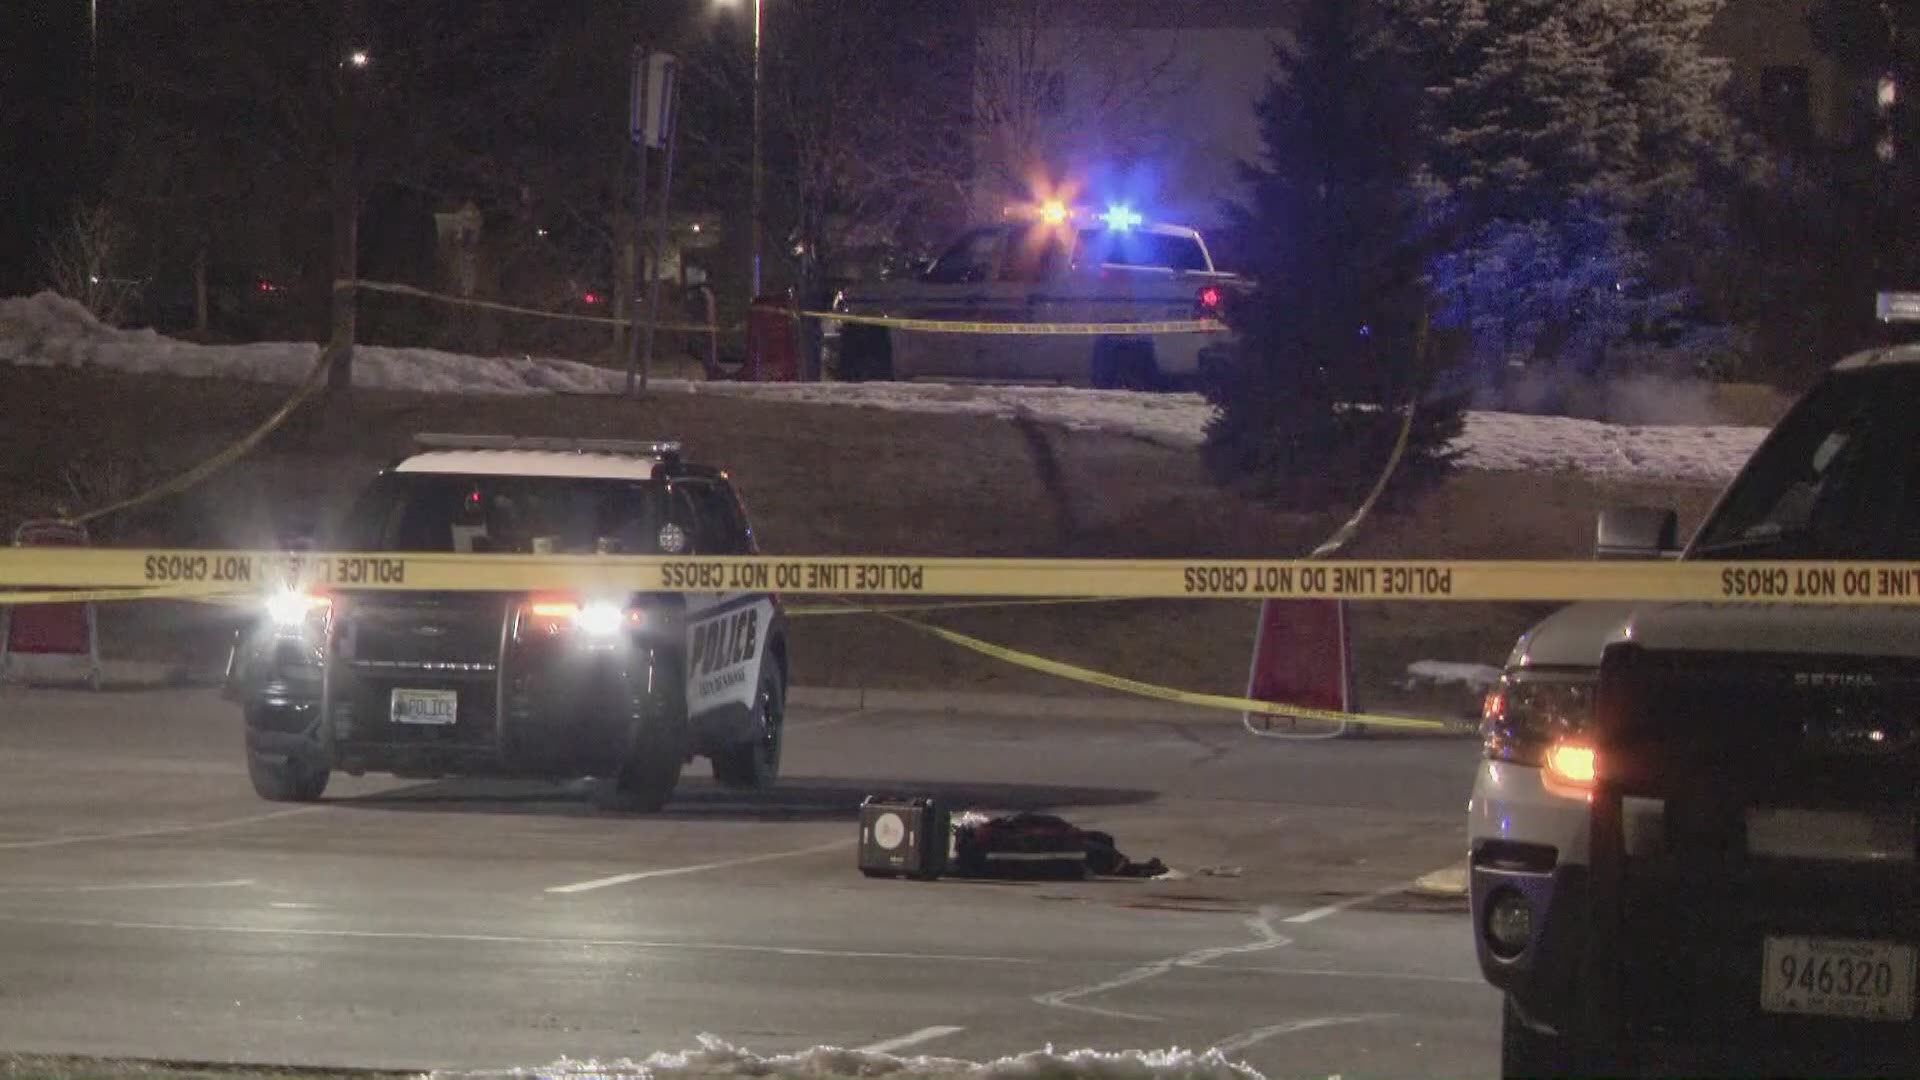 A 16-year-old teen was shot in the head according to police, and taken to Hennepin County Medical Center.